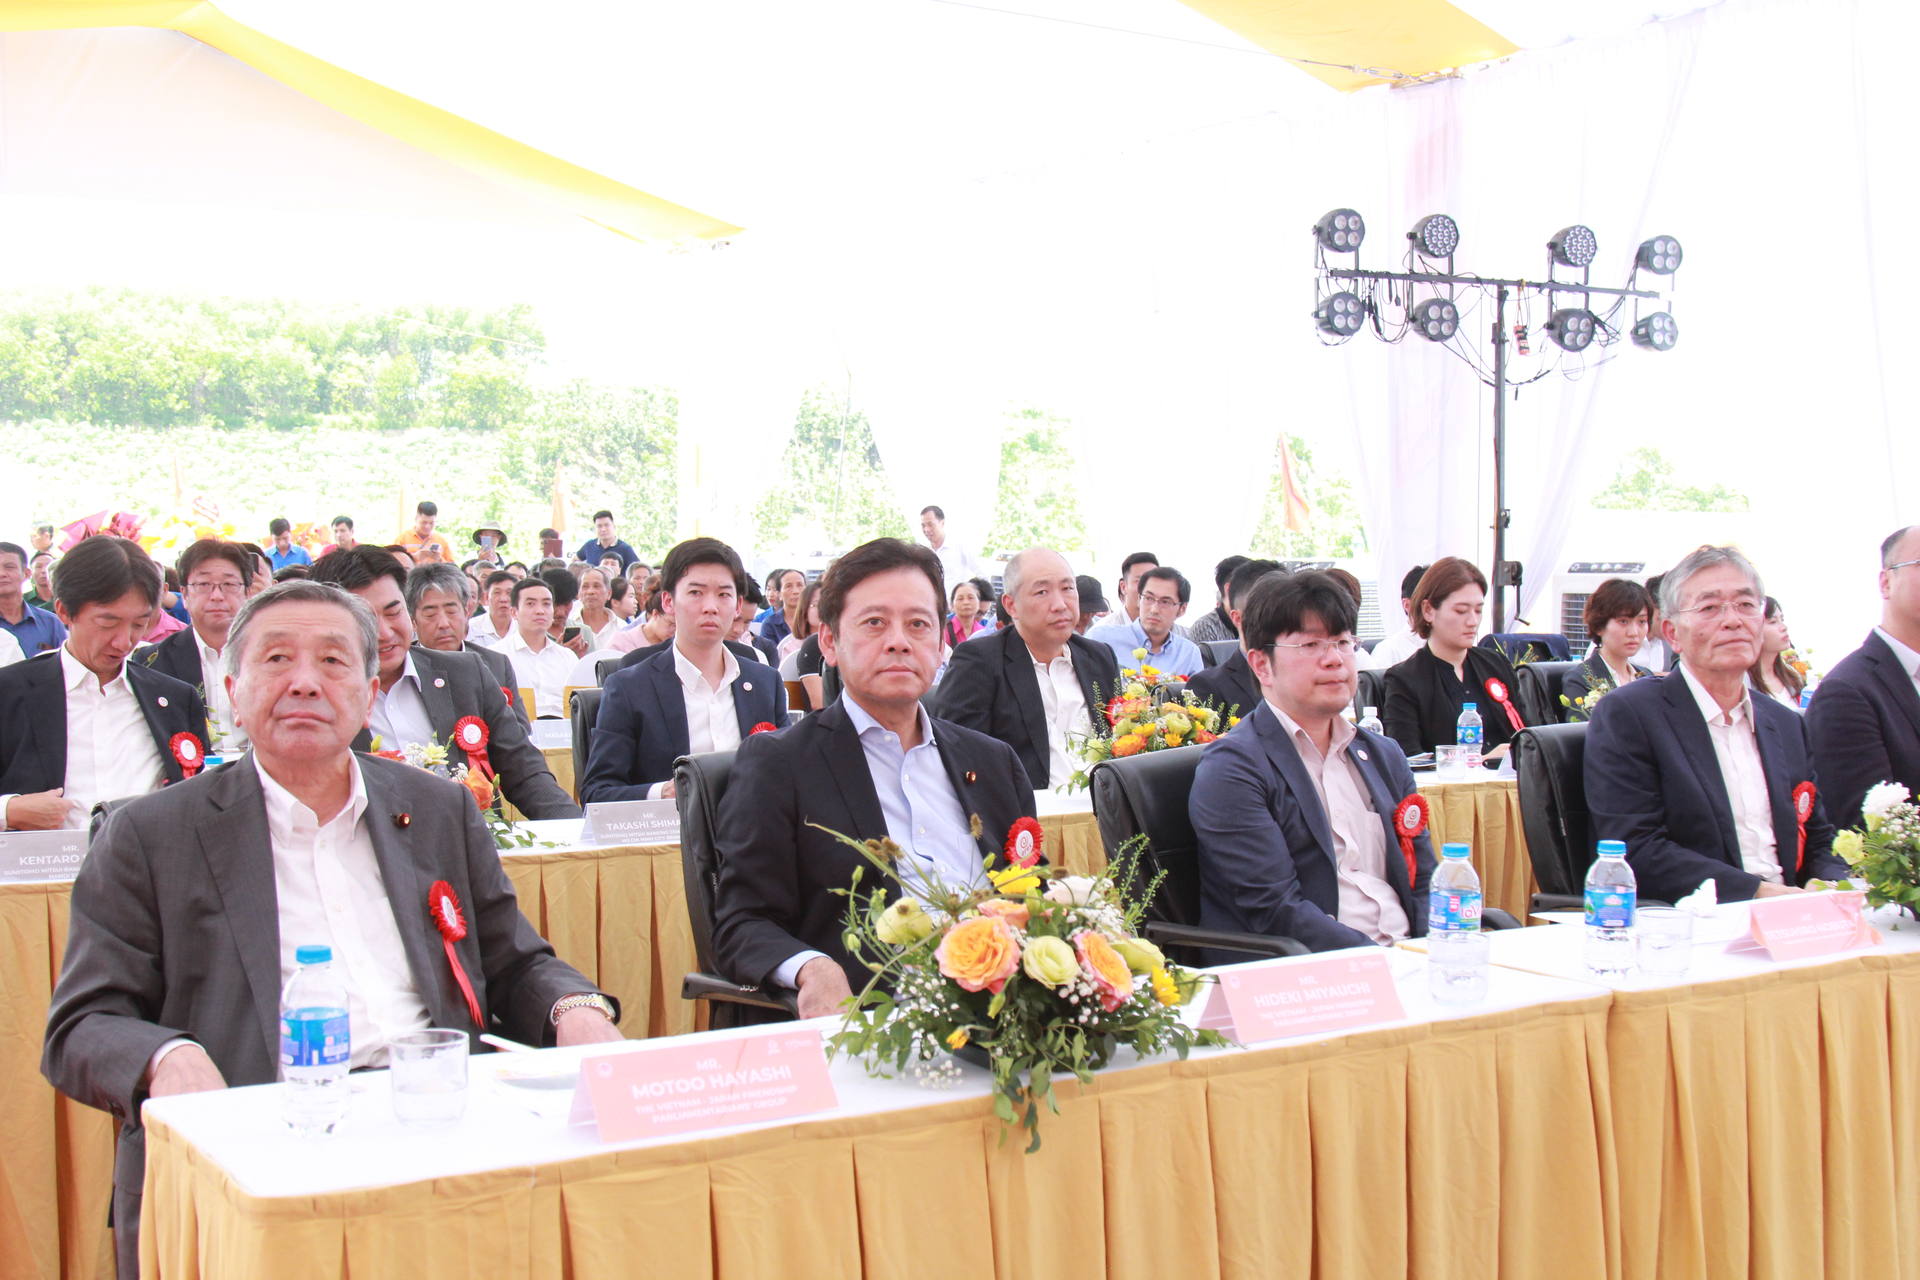 The Japan - Vietnam Parliamentary Friendship Alliance and Japanese business partners at the Groundbreaking Ceremony. Photo: Thanh Tien.